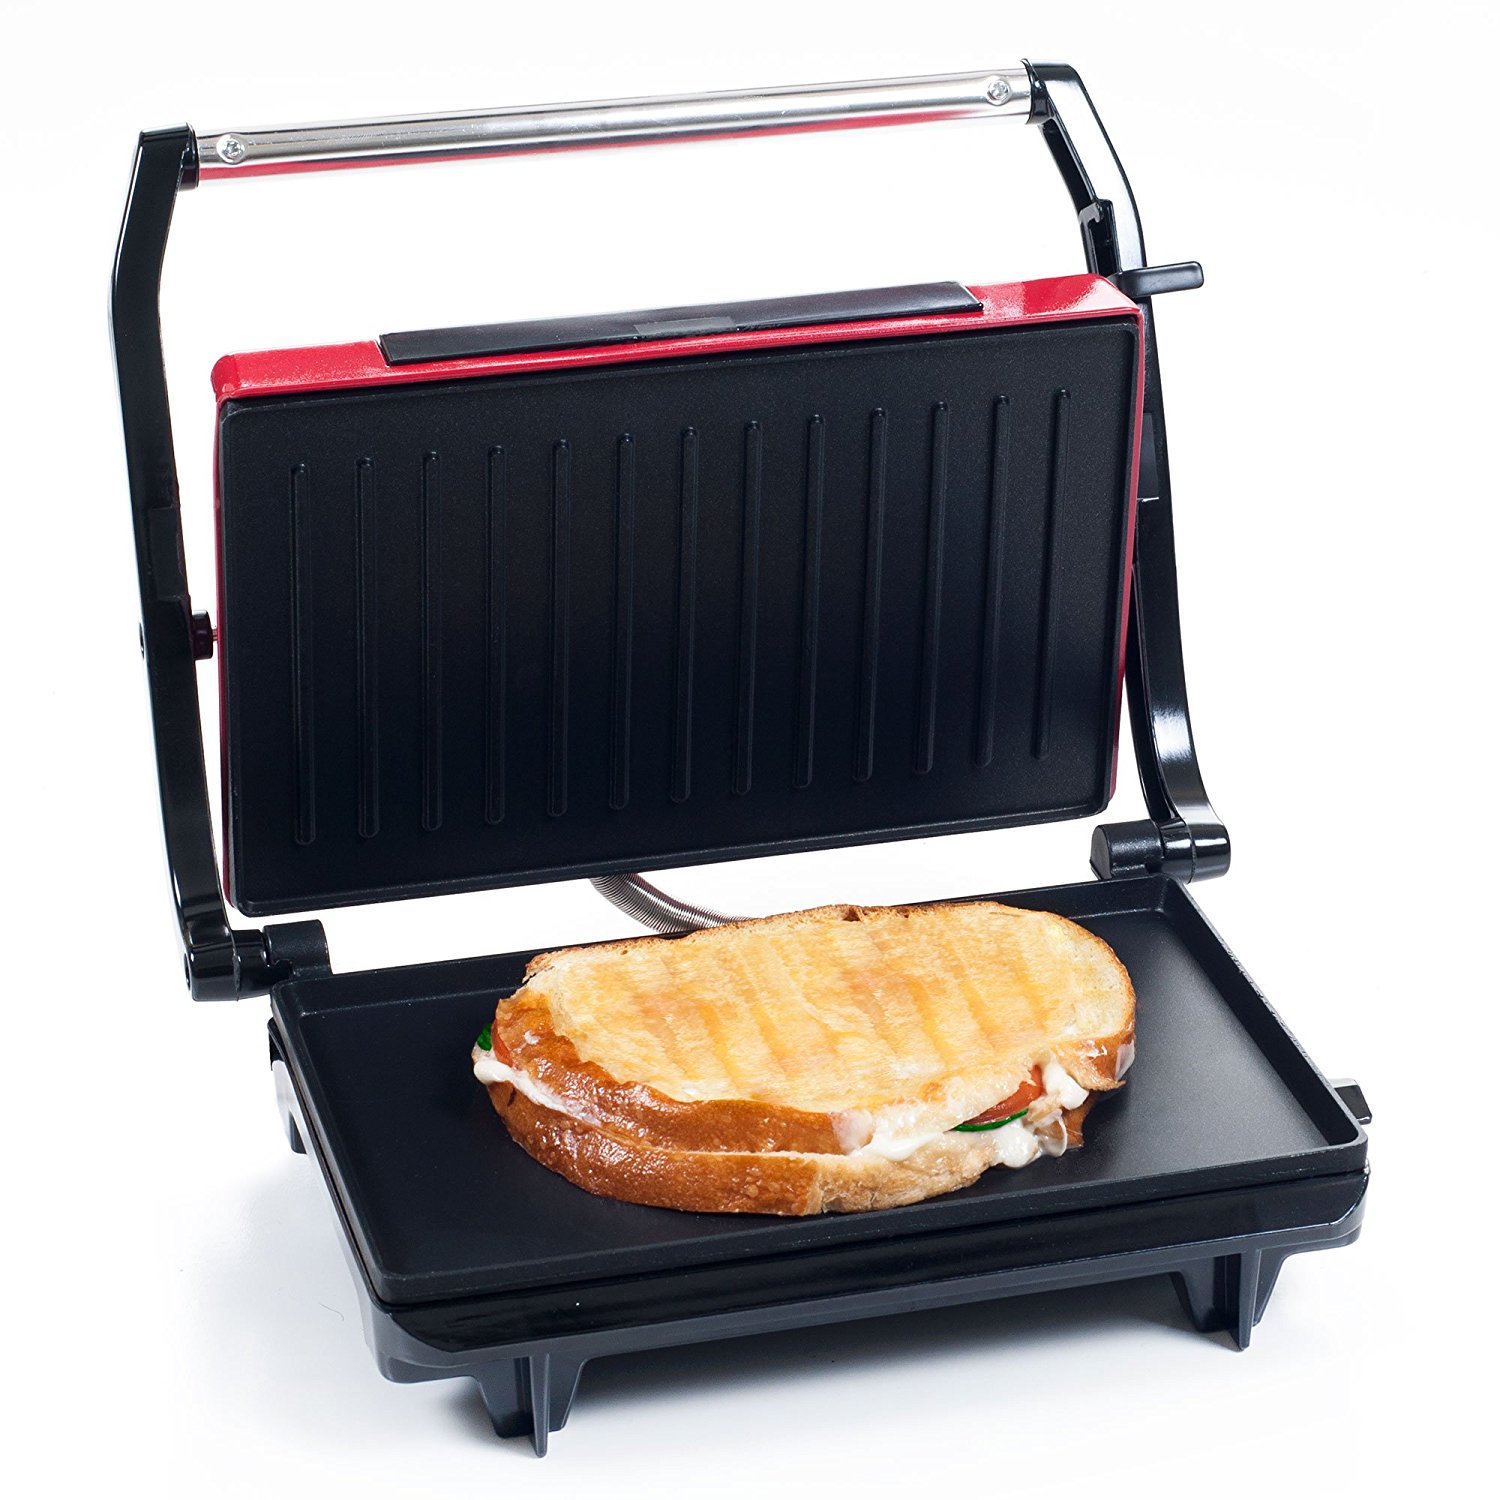 Chef Buddy Grill and Panini Press Indoor Grill and Sandwich Maker Just $15.00!!